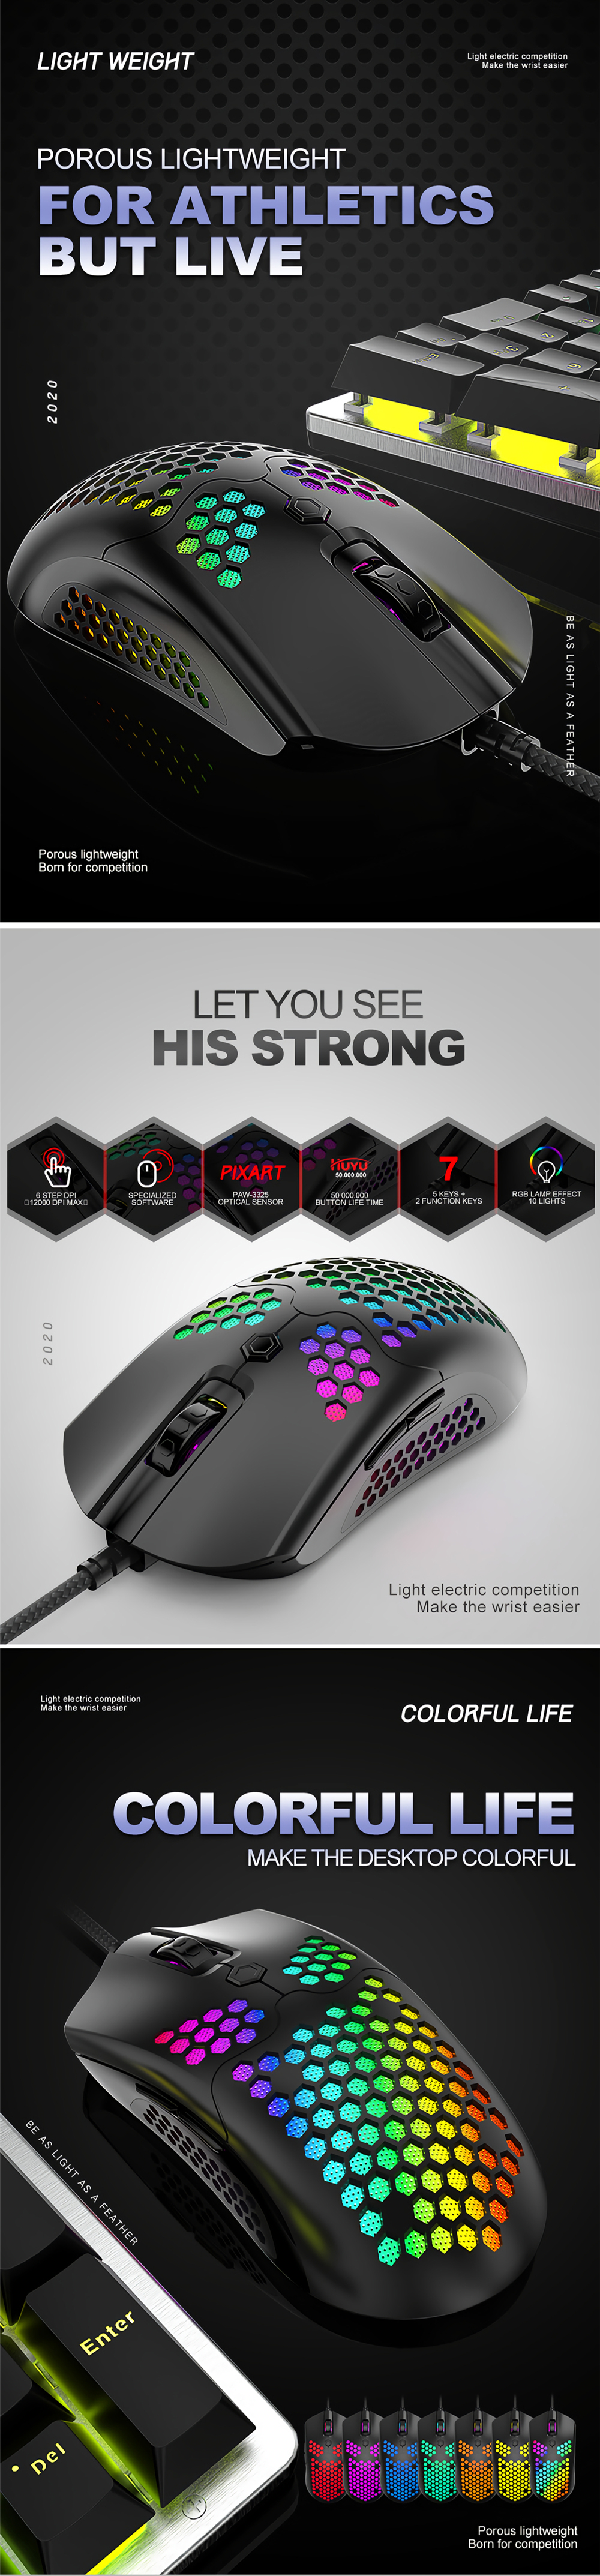 Free-wolf M5 Wired Game Mouse Breathing RGB Colorful Hollow Honeycomb Shape 12000DPI Gaming Mouse USB Wired Gamer Mice for Desktop Computer Laptop PC 13